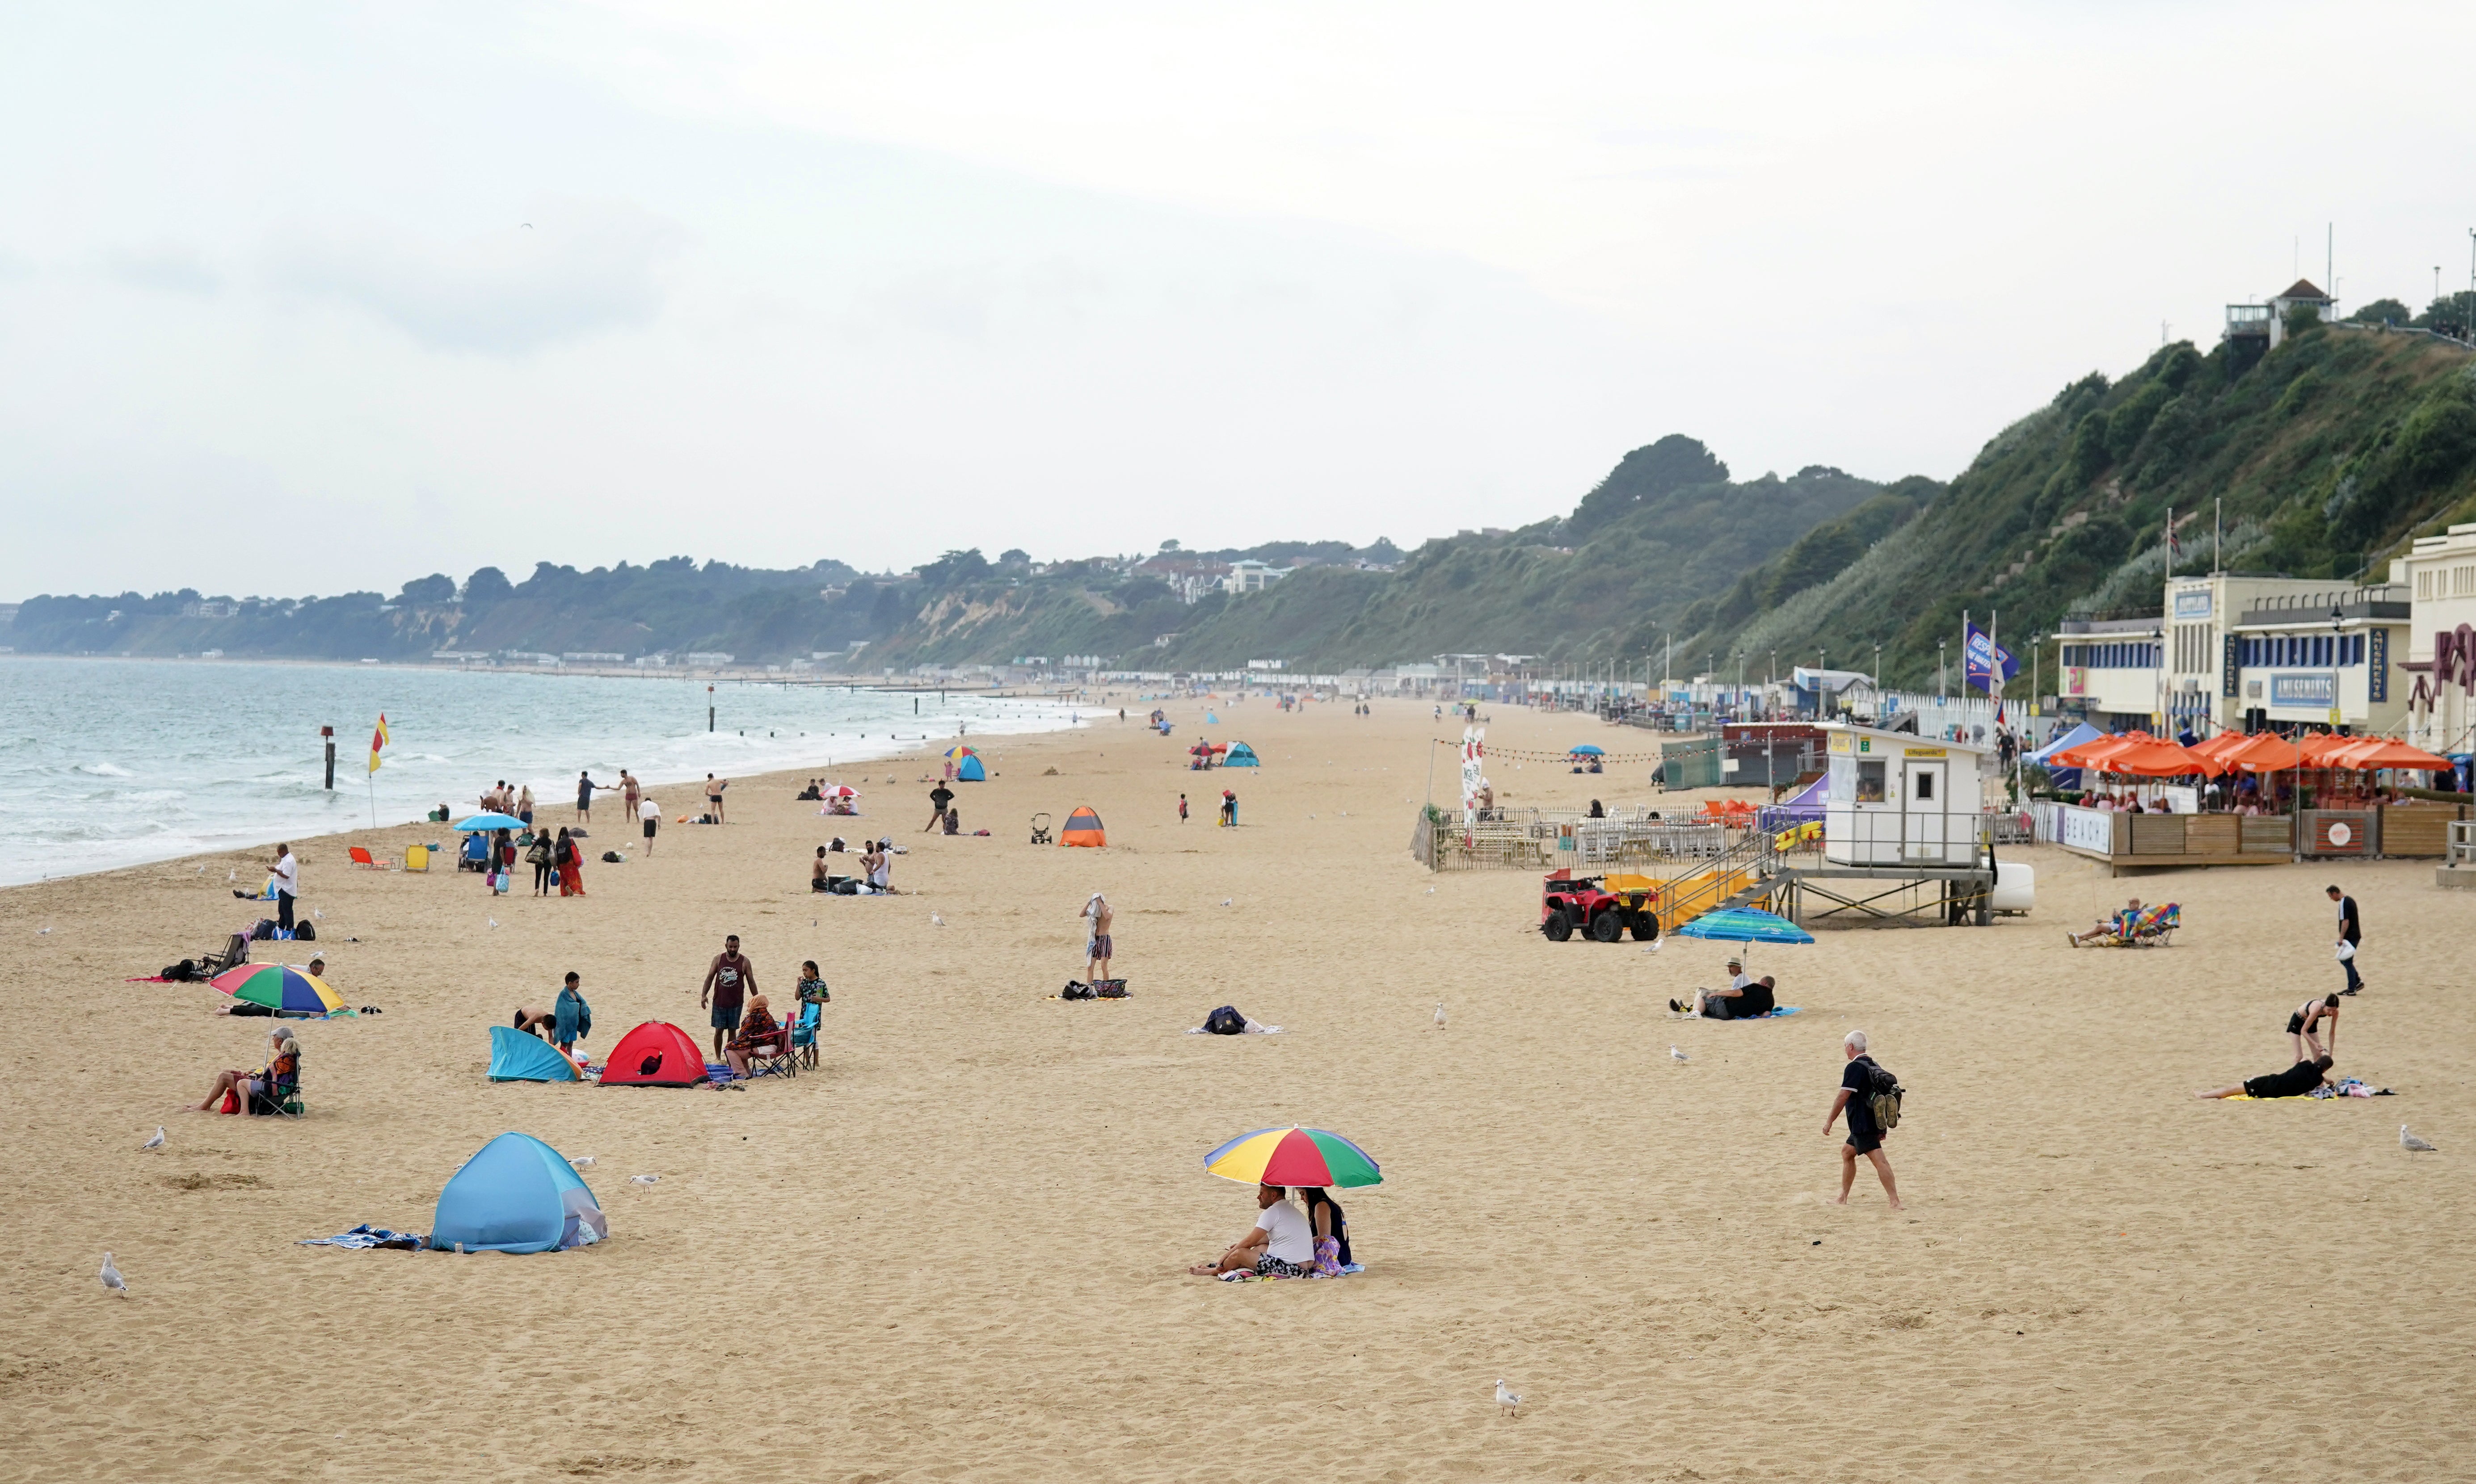 People on Bournemouth beach in Dorset